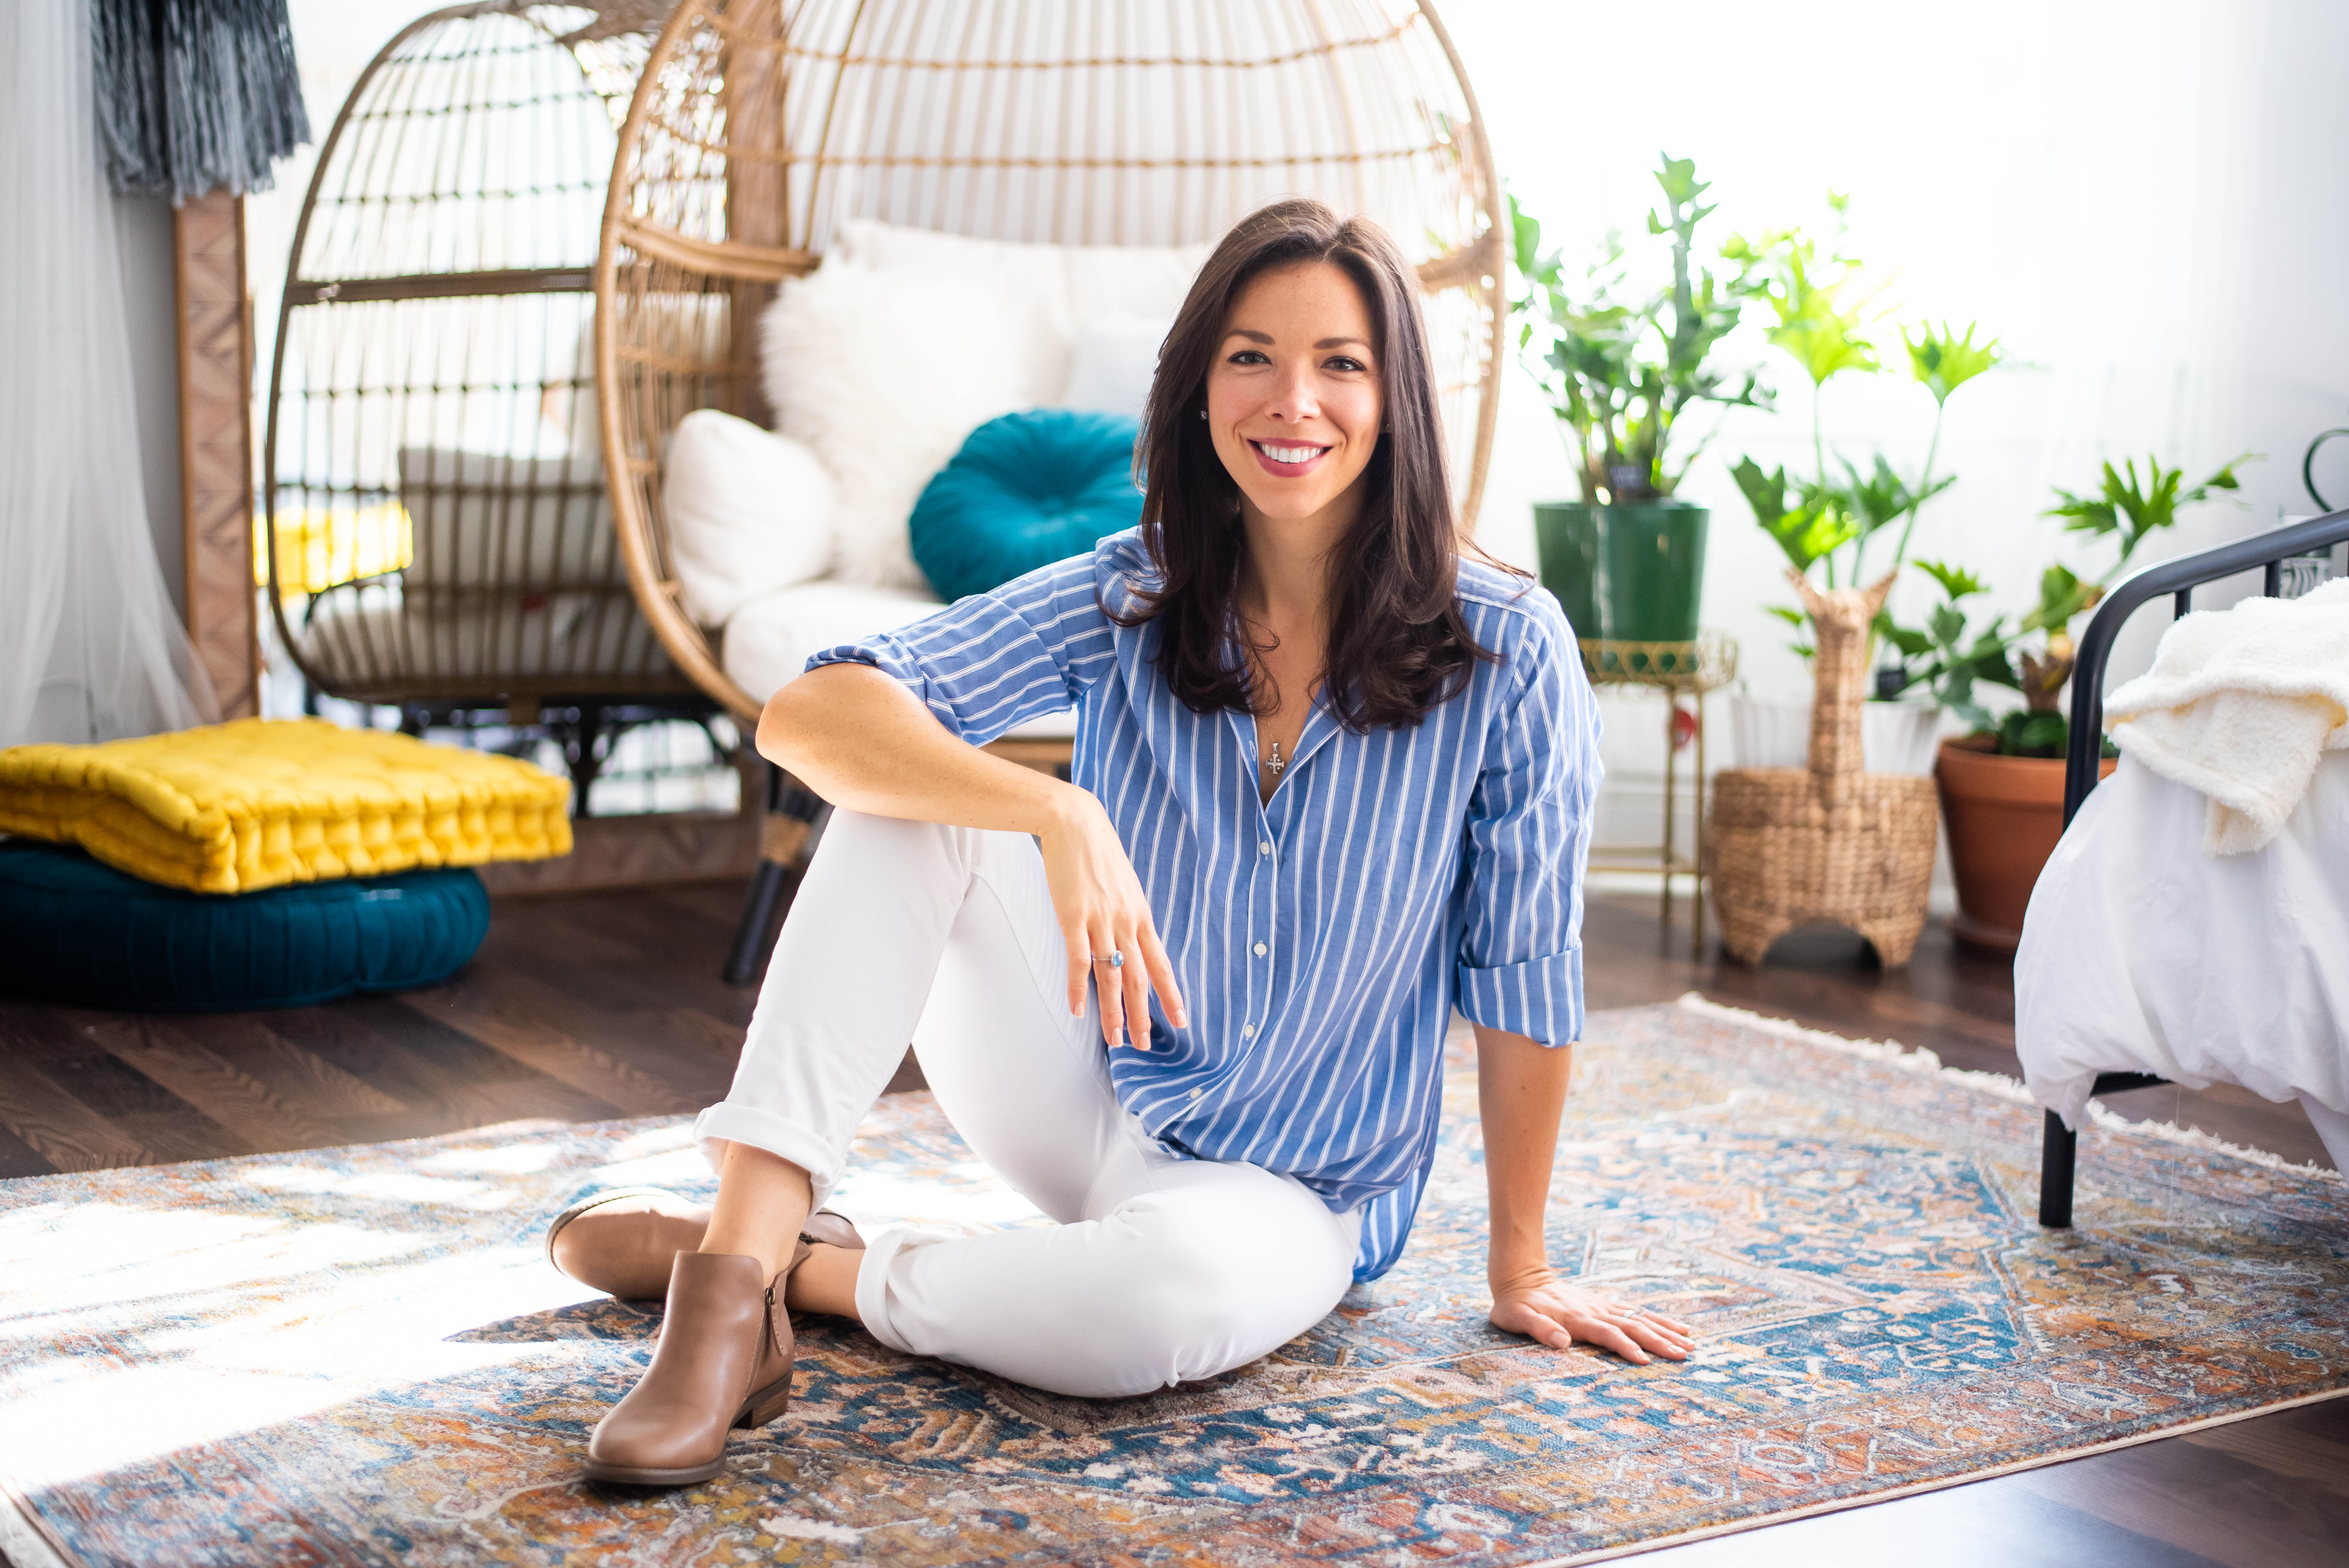 Kate Ziegler smiling and sitting on patterned rug.